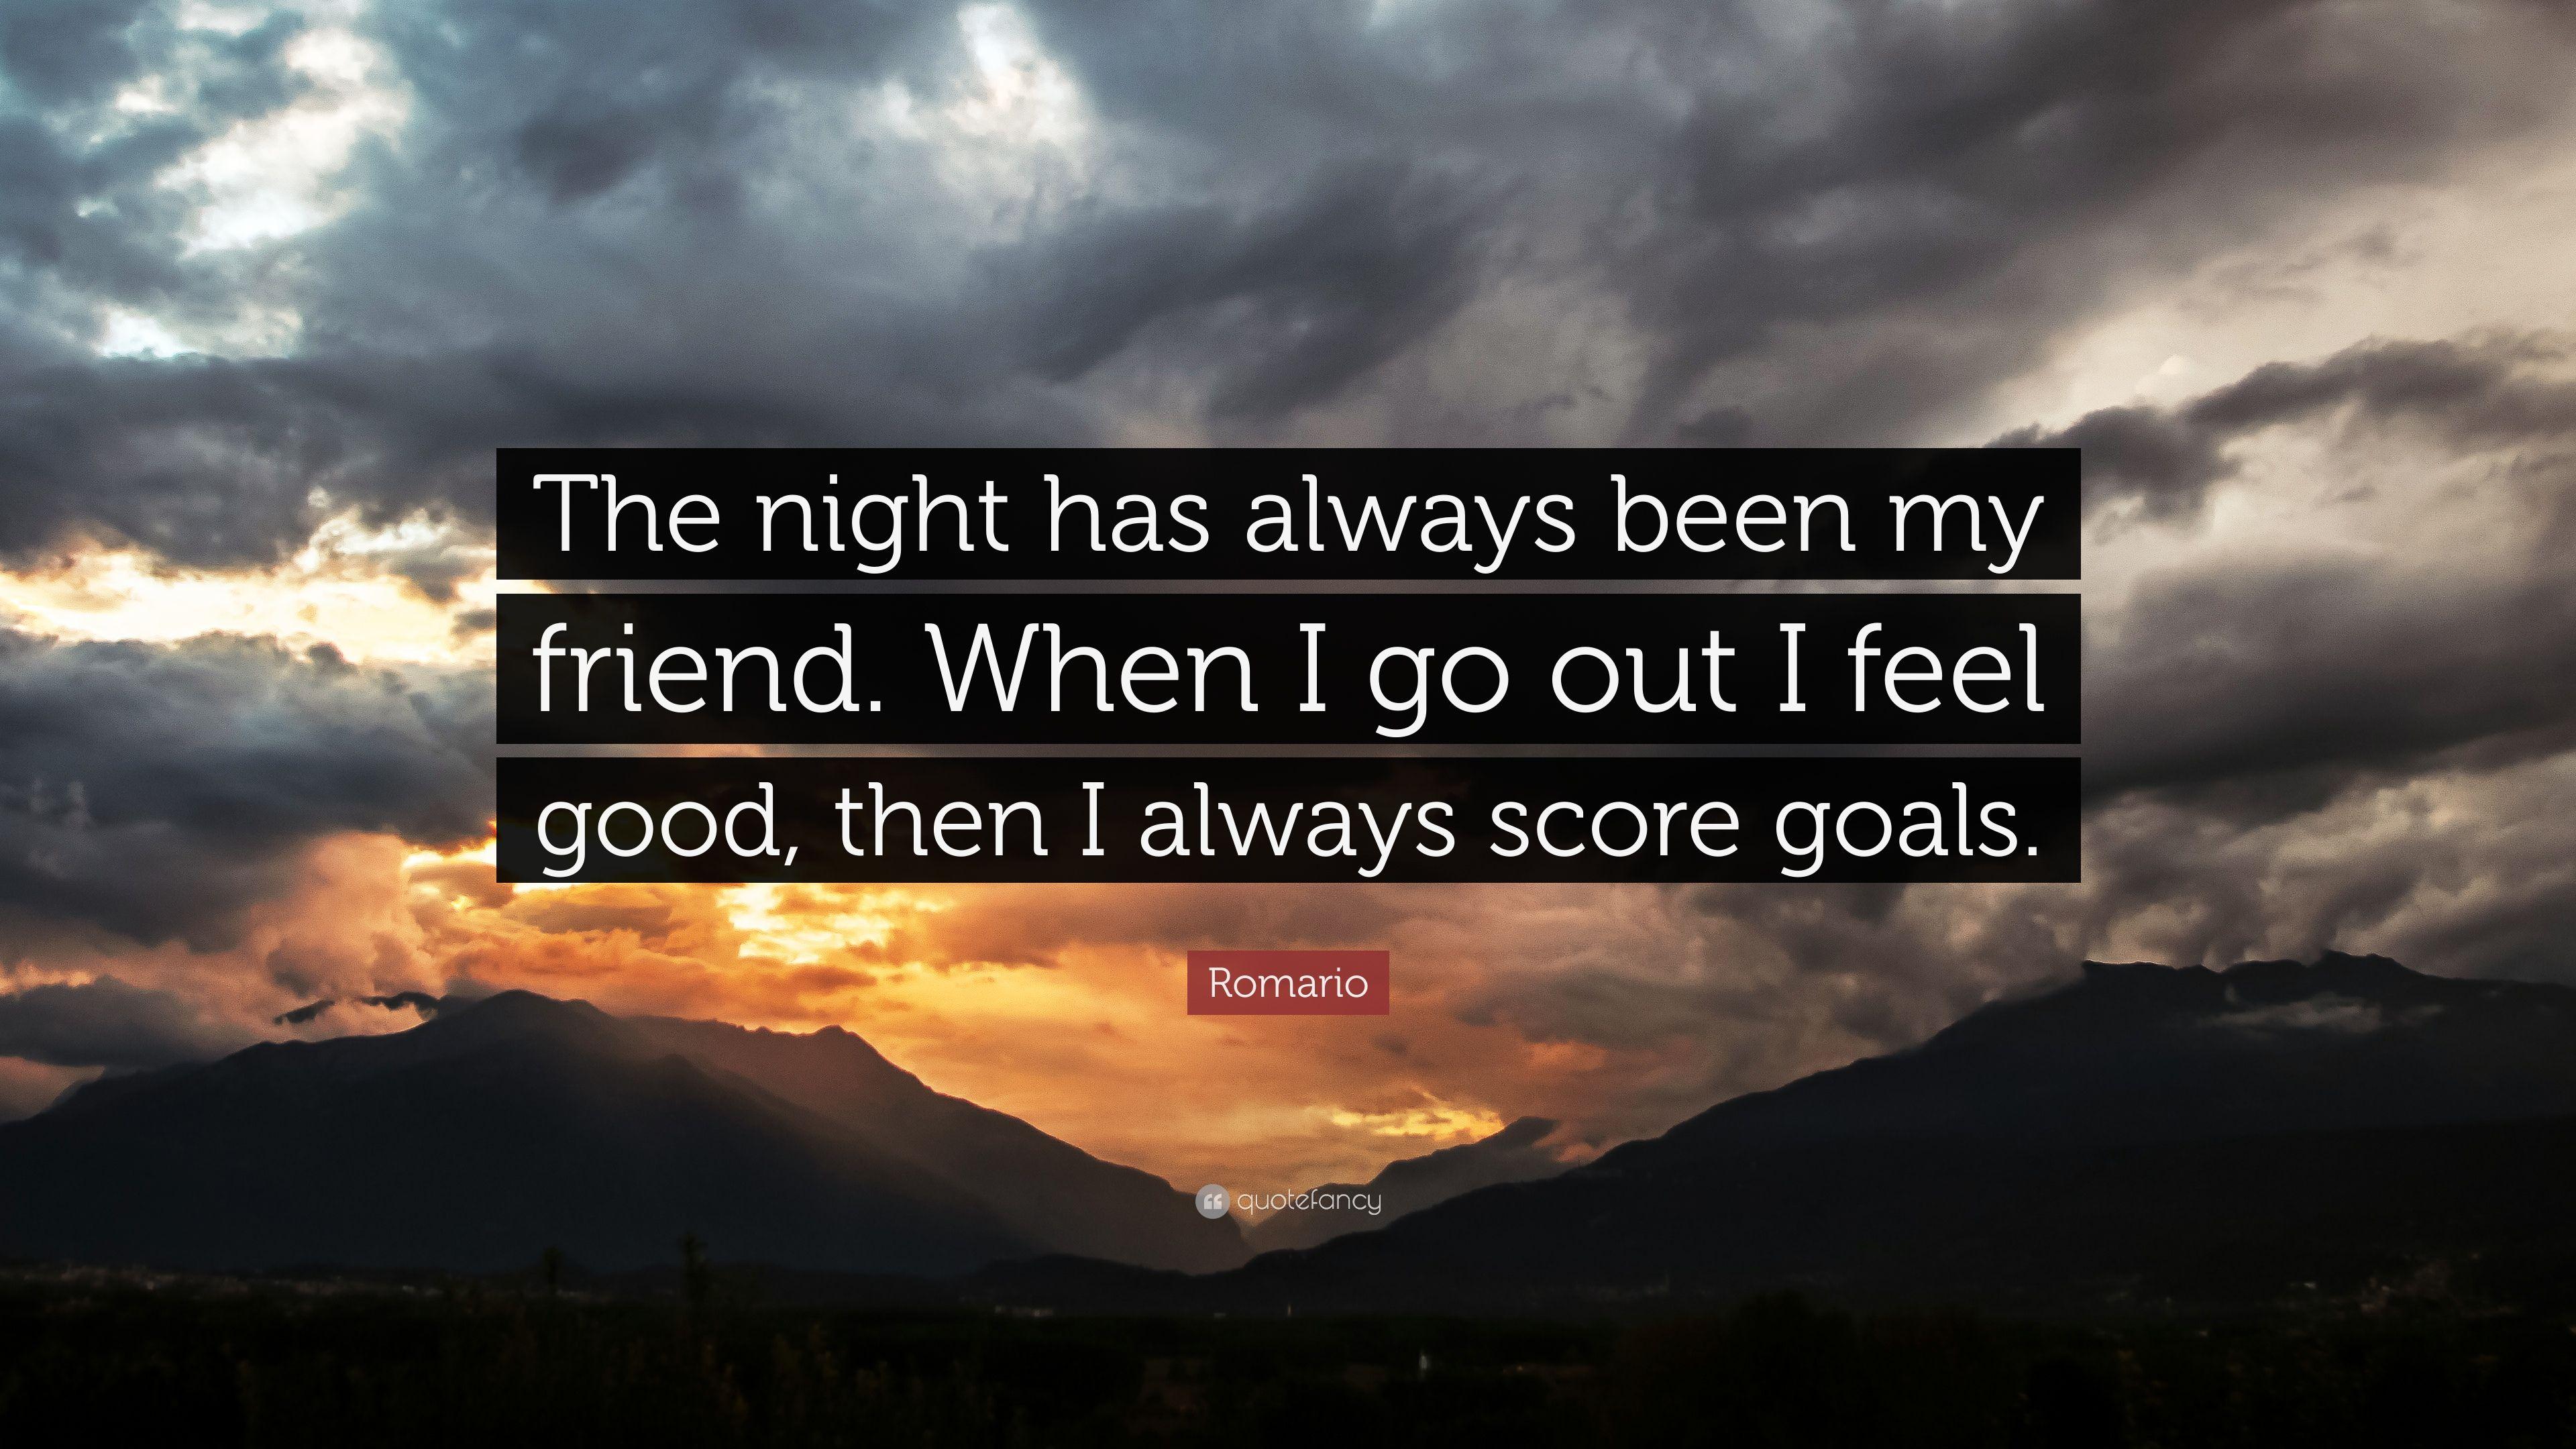 Romario Quote: “The night has always been my friend. When I go out I